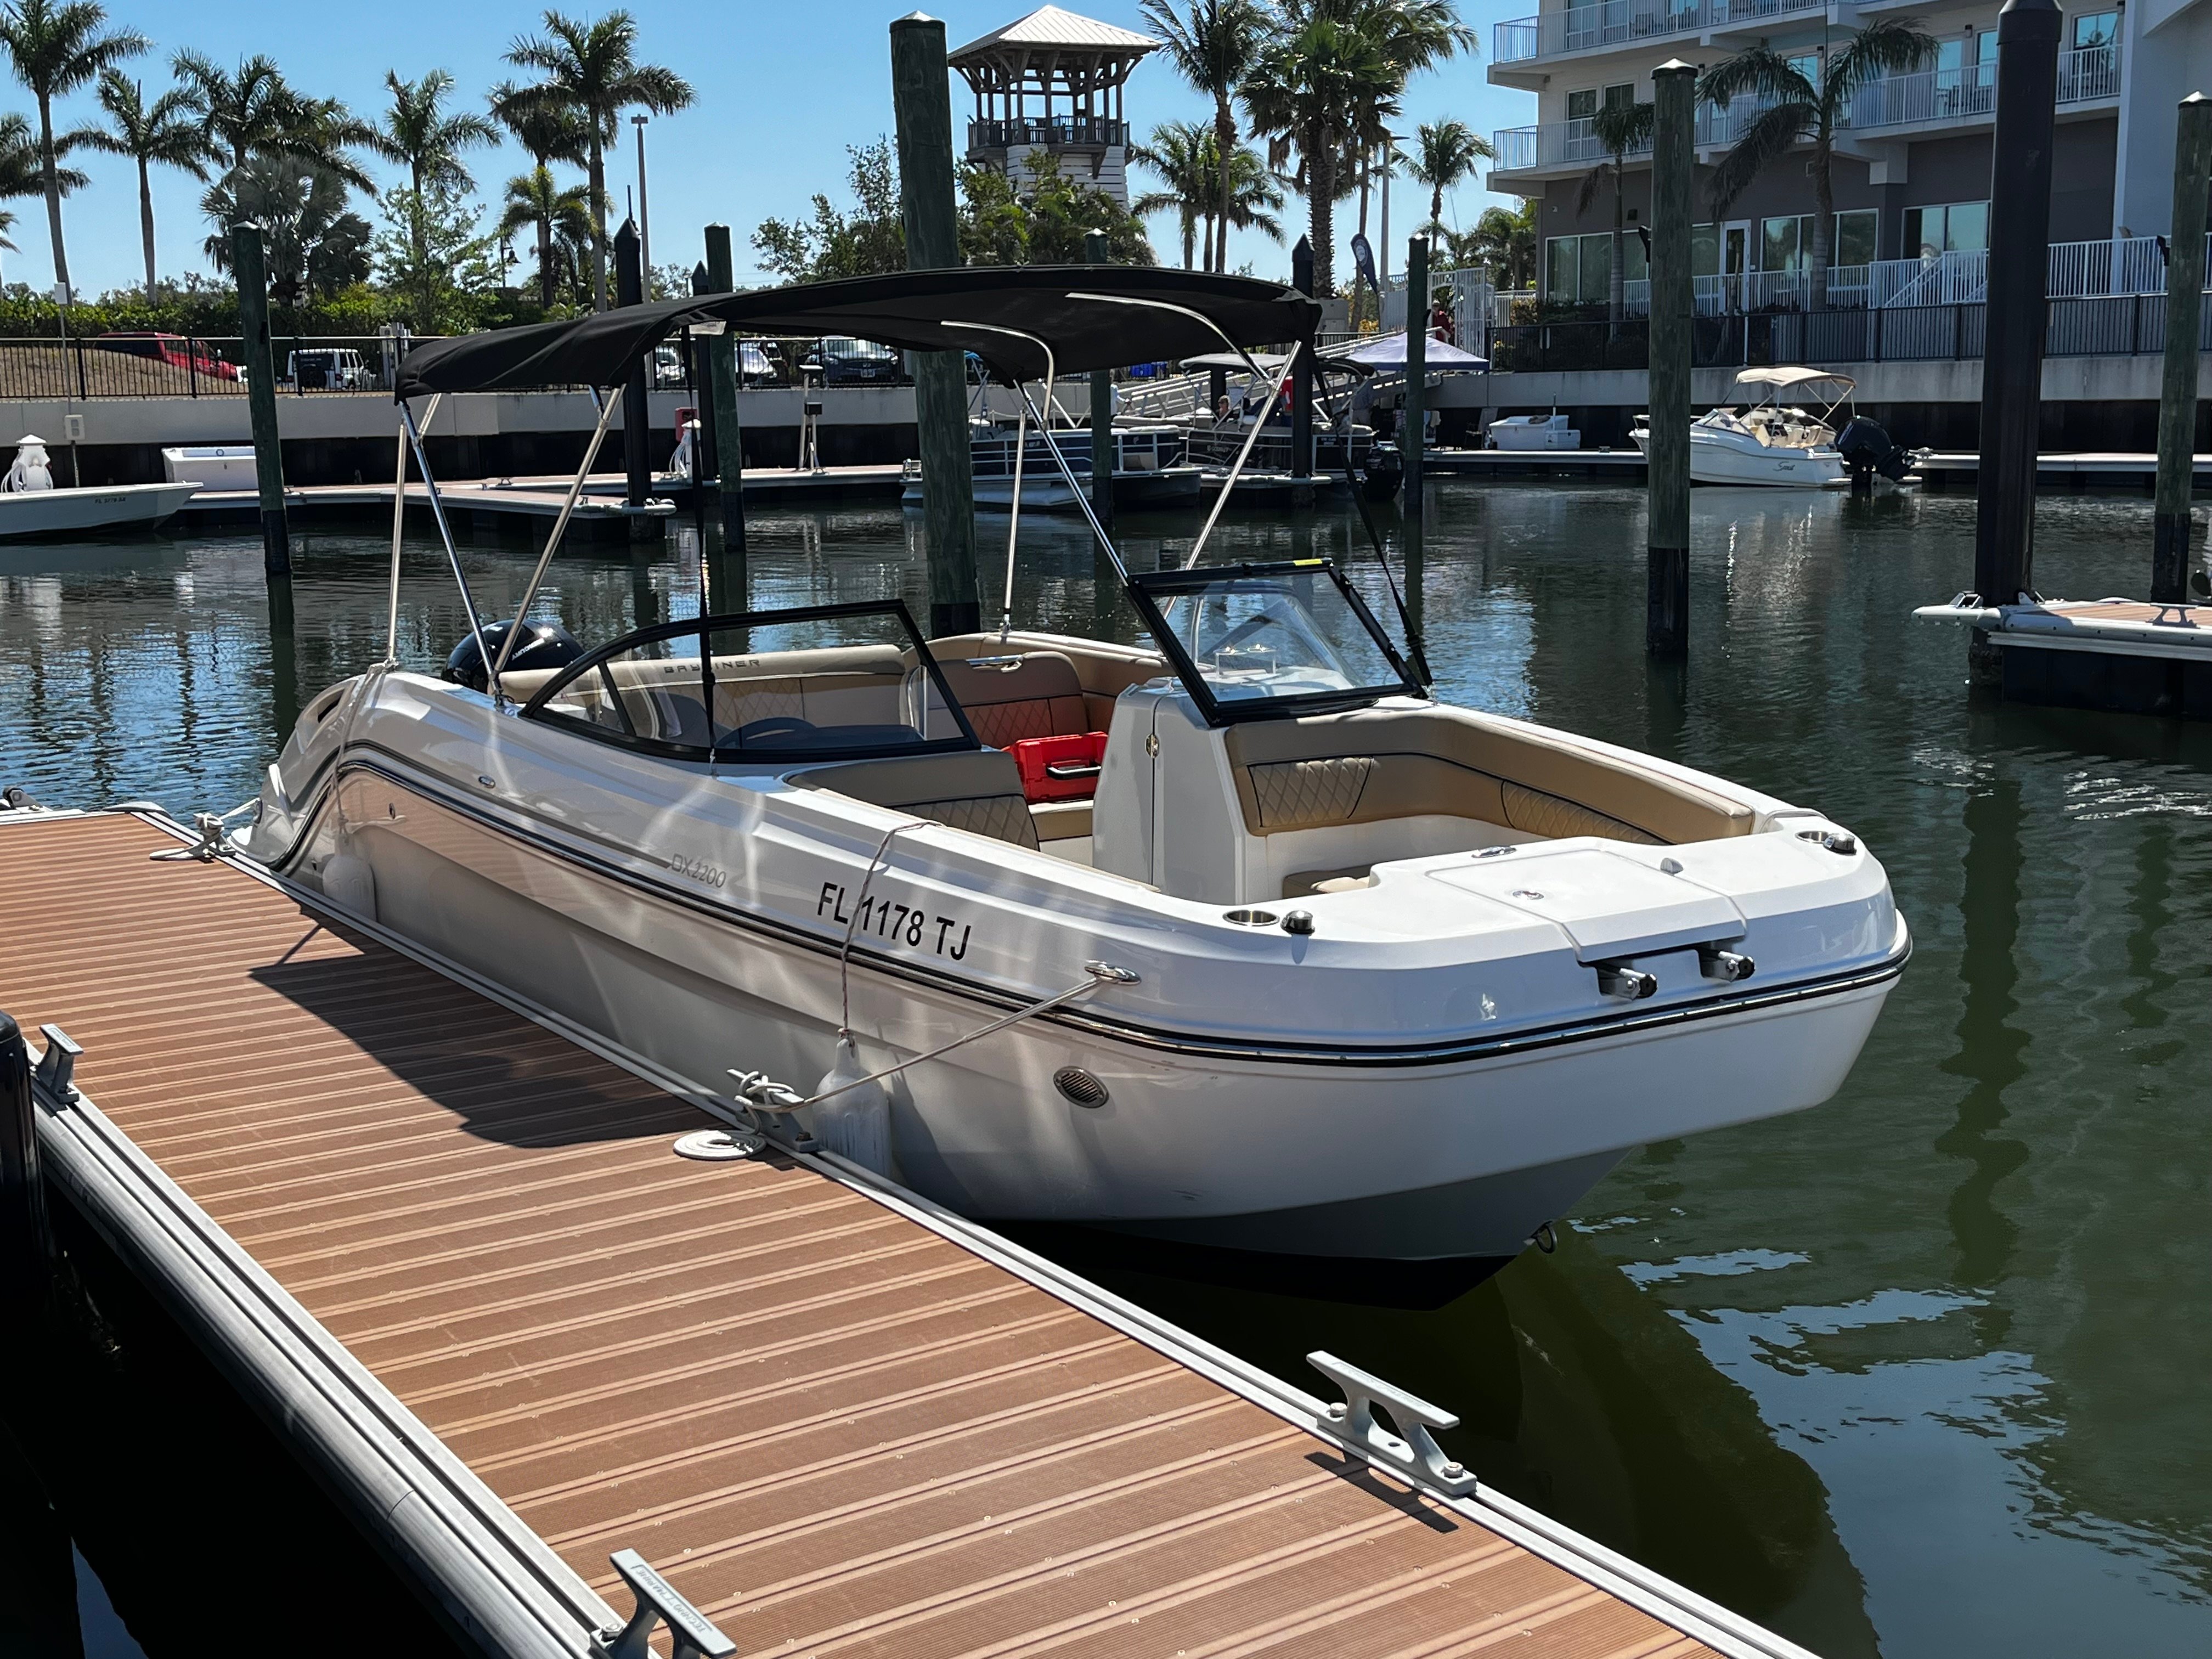 WATER SHED (Bayliner 22' Deck Boat 150 HP - Cruising)